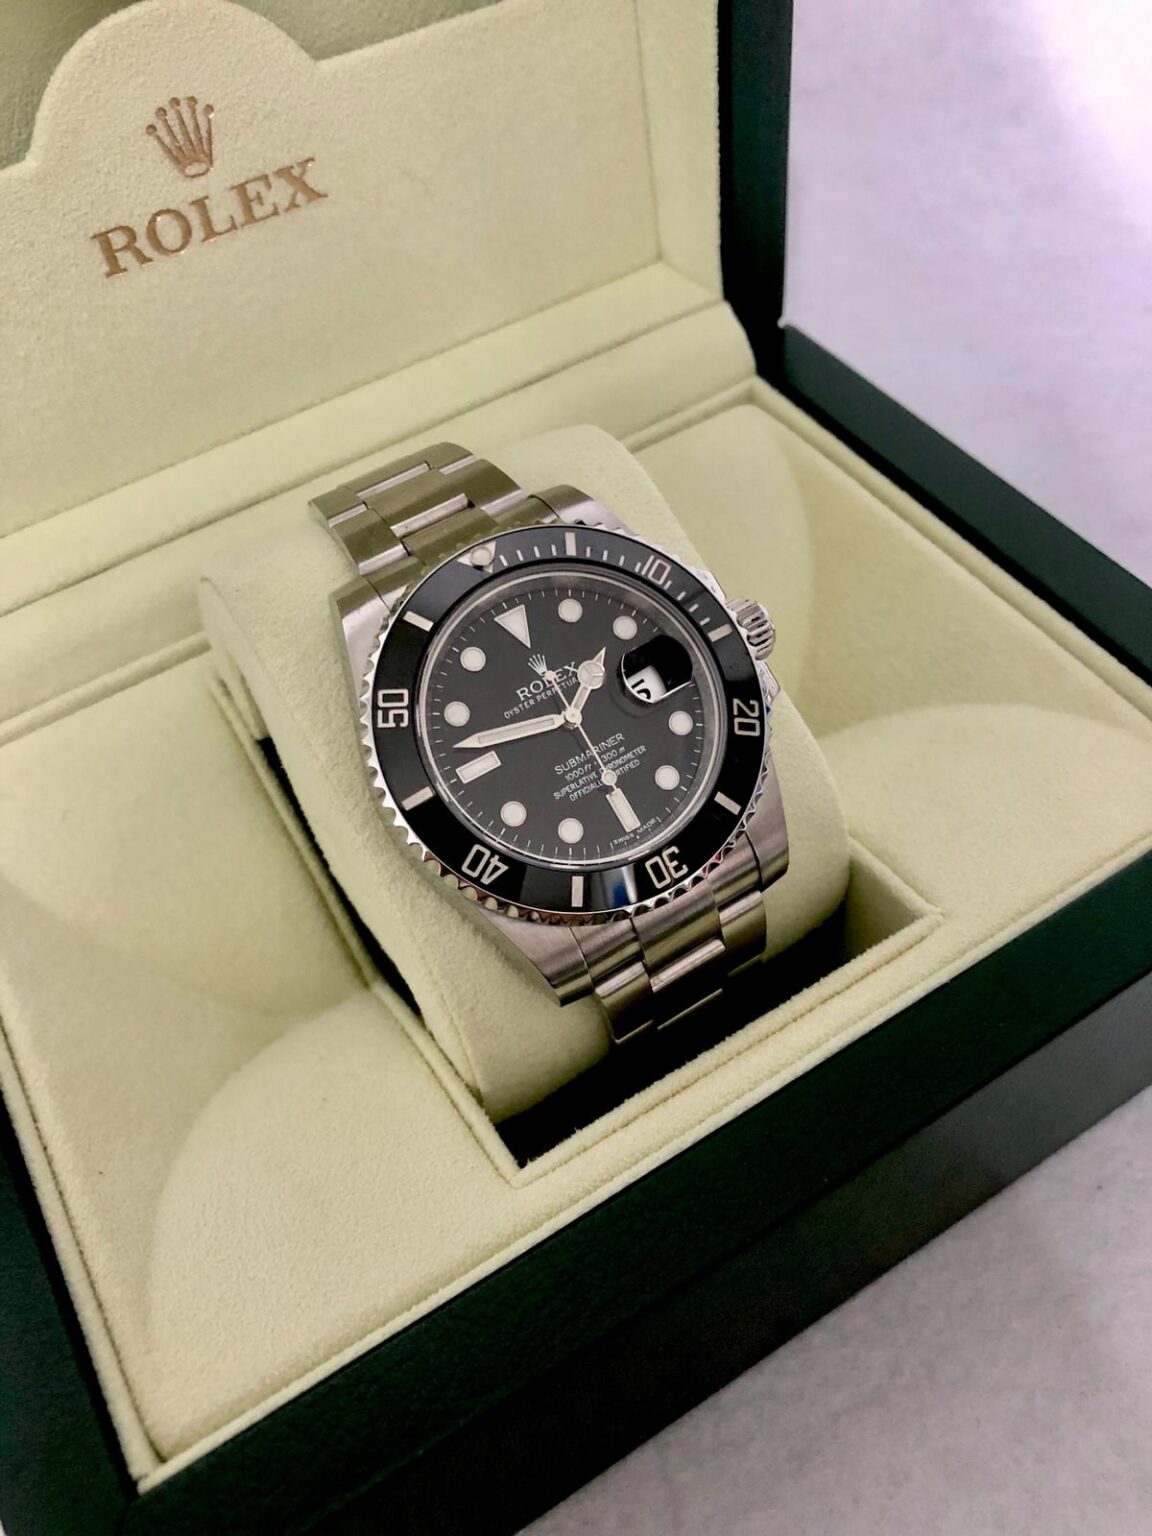 Are Rolex watches a good investment? Gold House